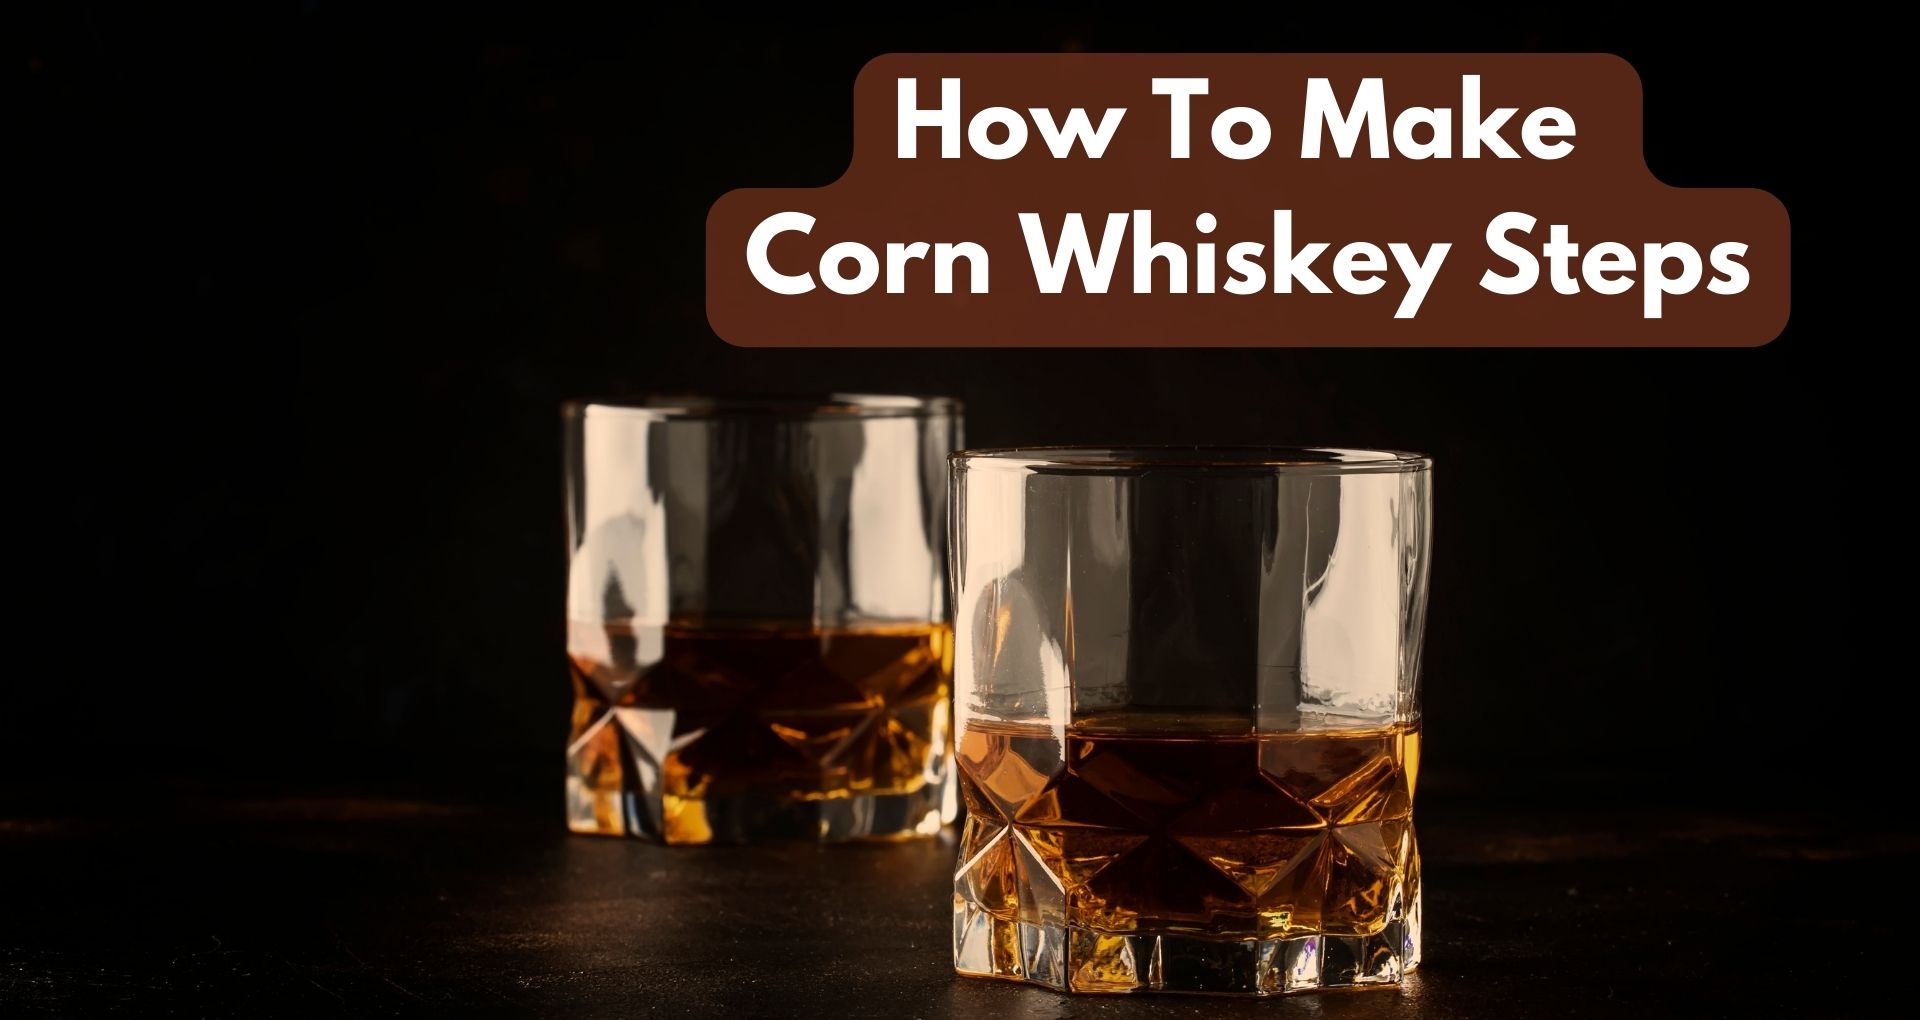 How To Make Corn Whiskey Steps